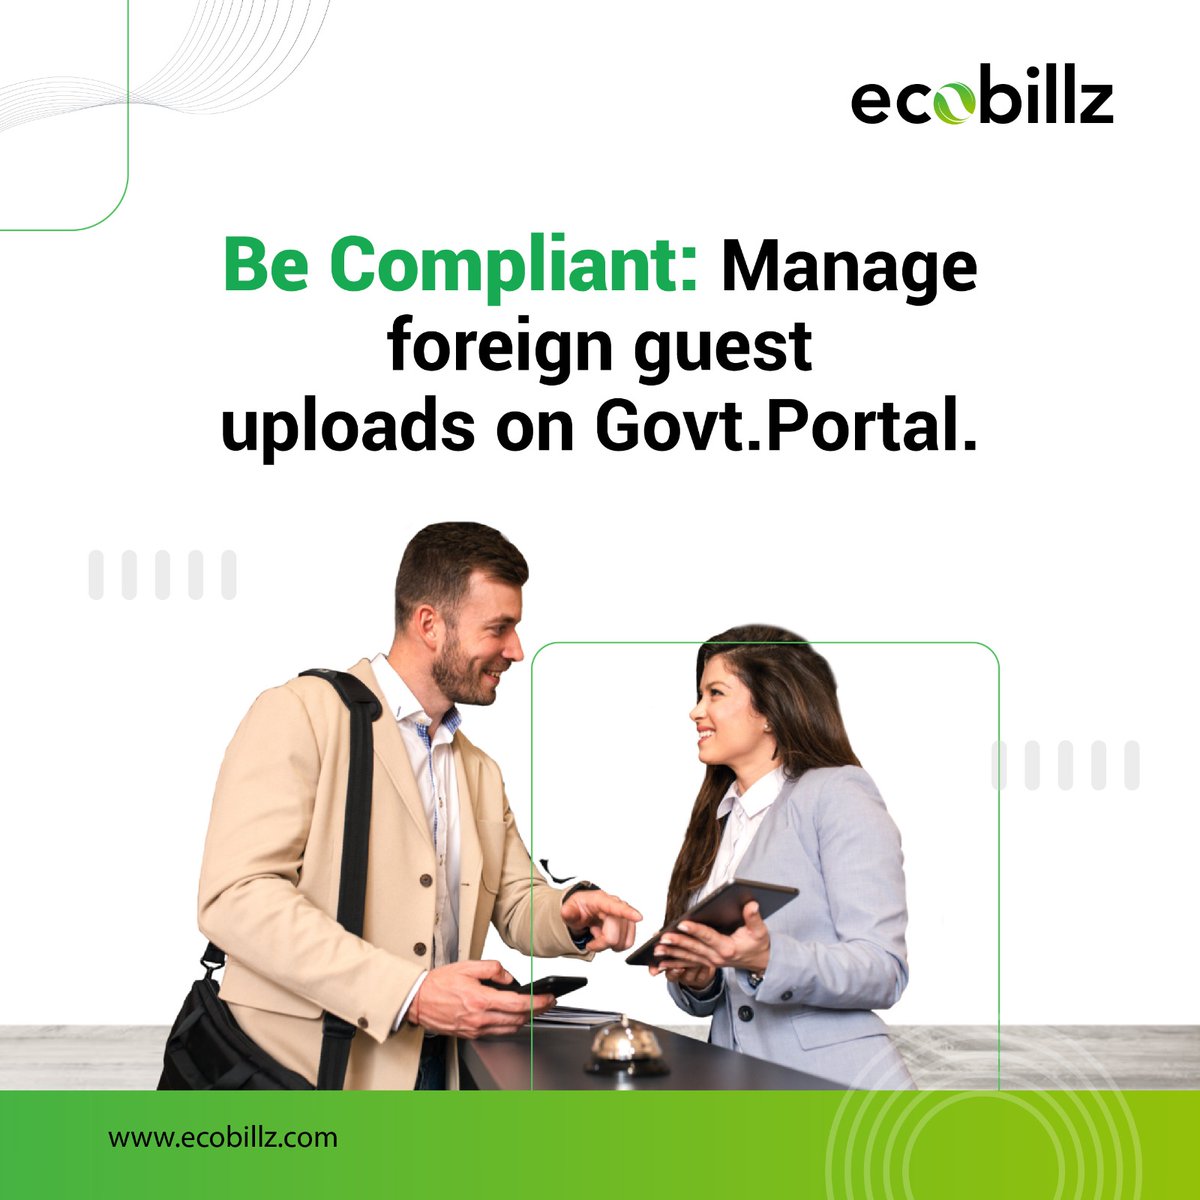 @Ecobillz Private Limited will help you to be Compliant: Manage foreign guest uploads on Govt. Portal. #compliance #foreignguest #foreign #guestservices #guestsatisfaction #government #governmentportals #incompliance #hospitality #hospitalityindustry #retail #hospitalitytech